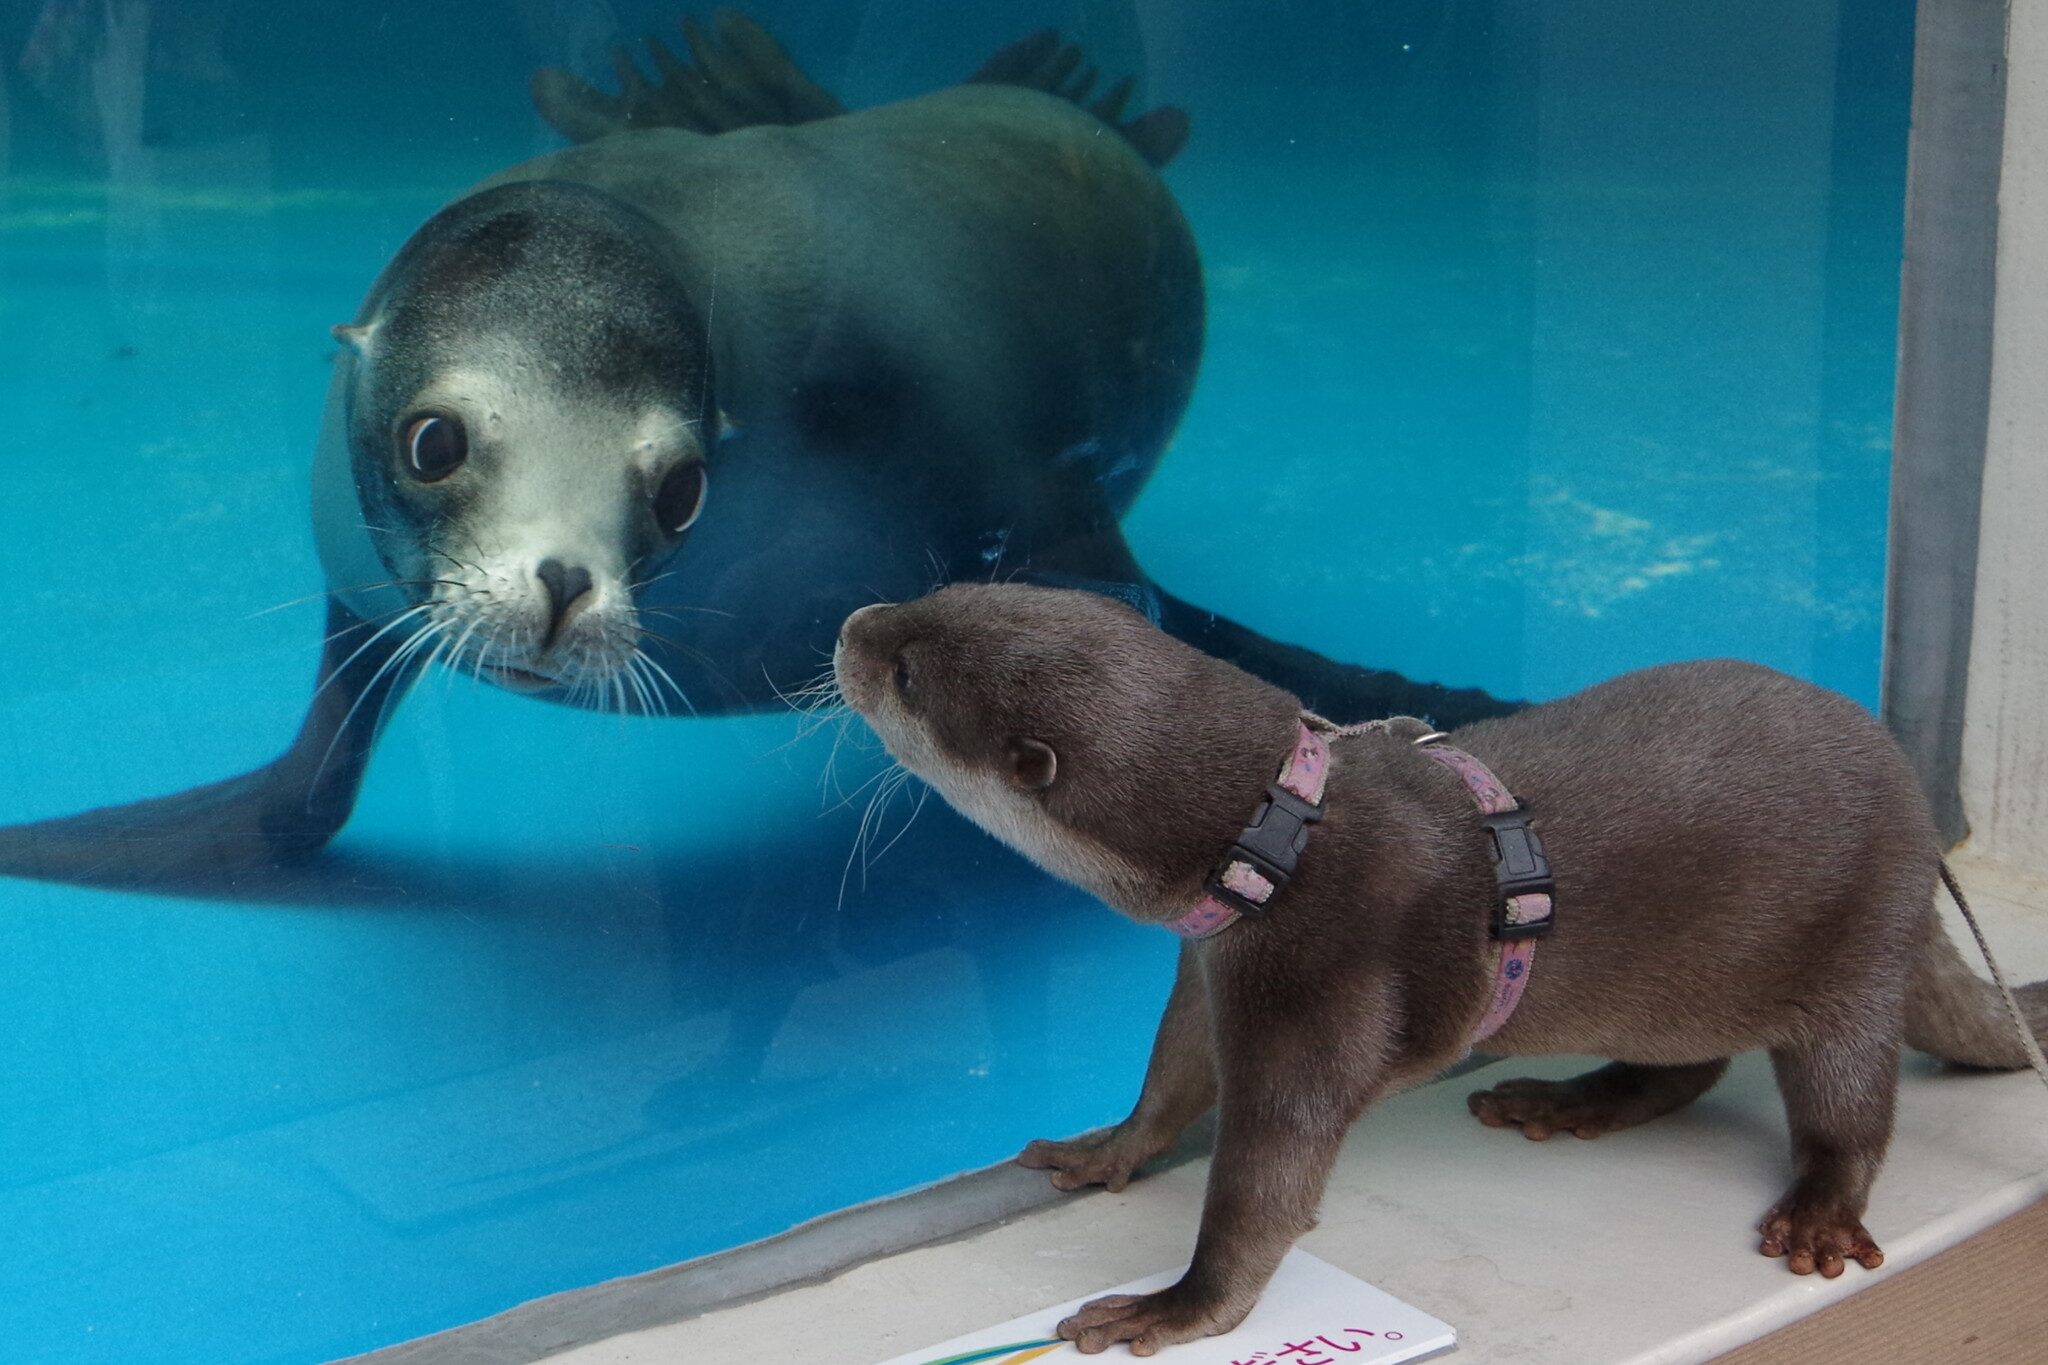 An otter looks through a window into an aquarium. From inside, a sea lion stares back. Their poses are nearly identical, like a mirror image.